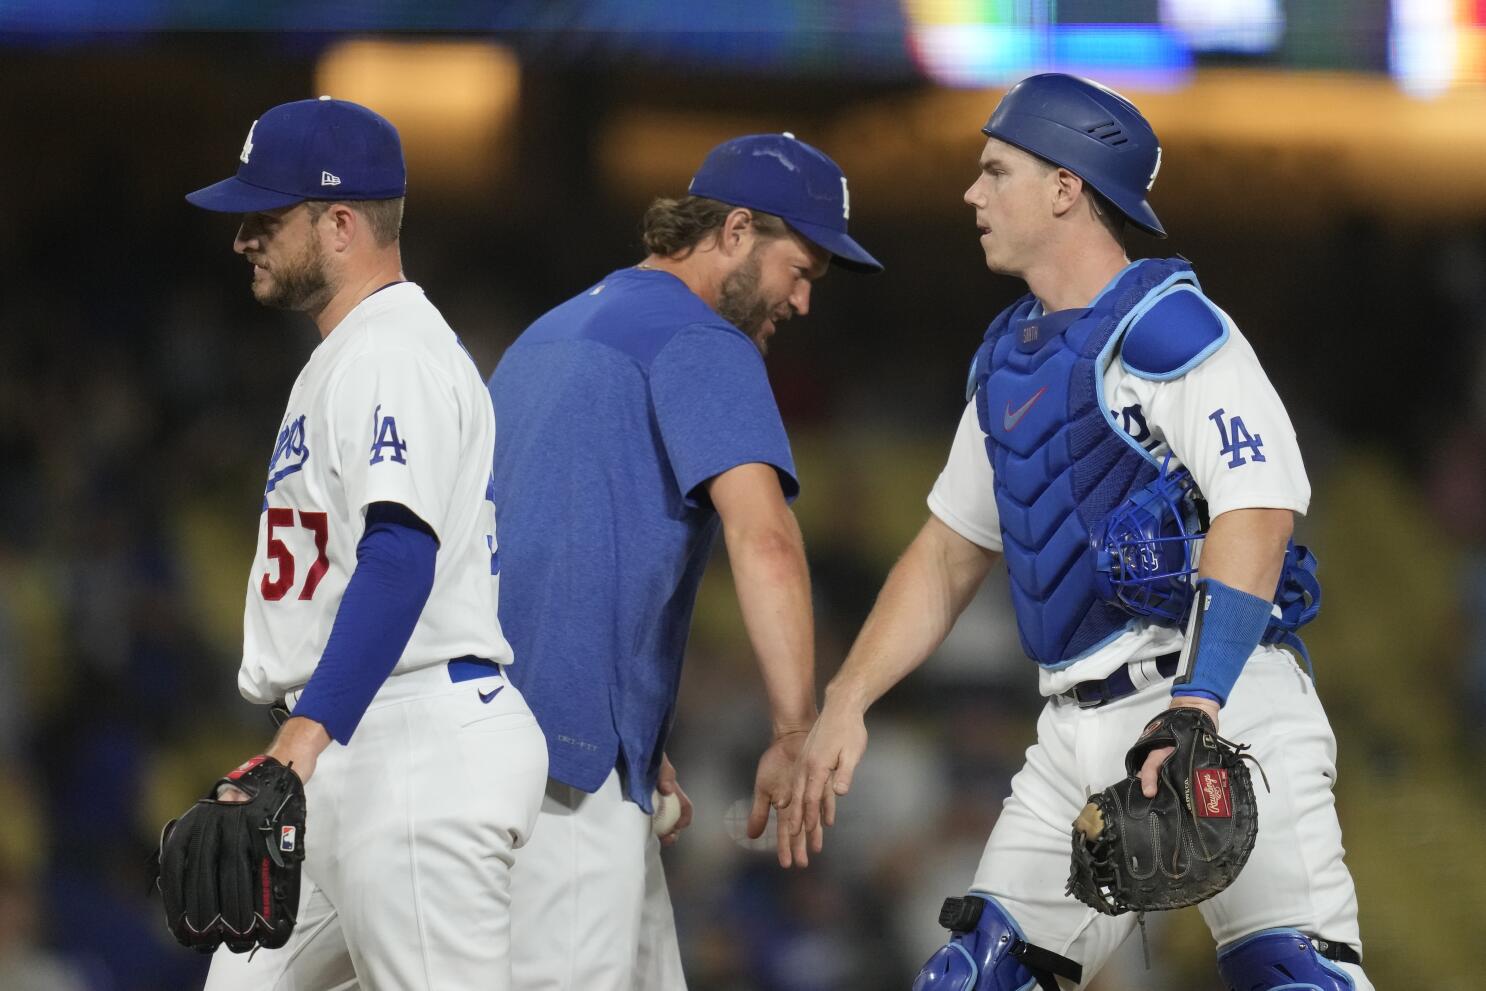 Dodgers starters rested and effective by design - True Blue LA